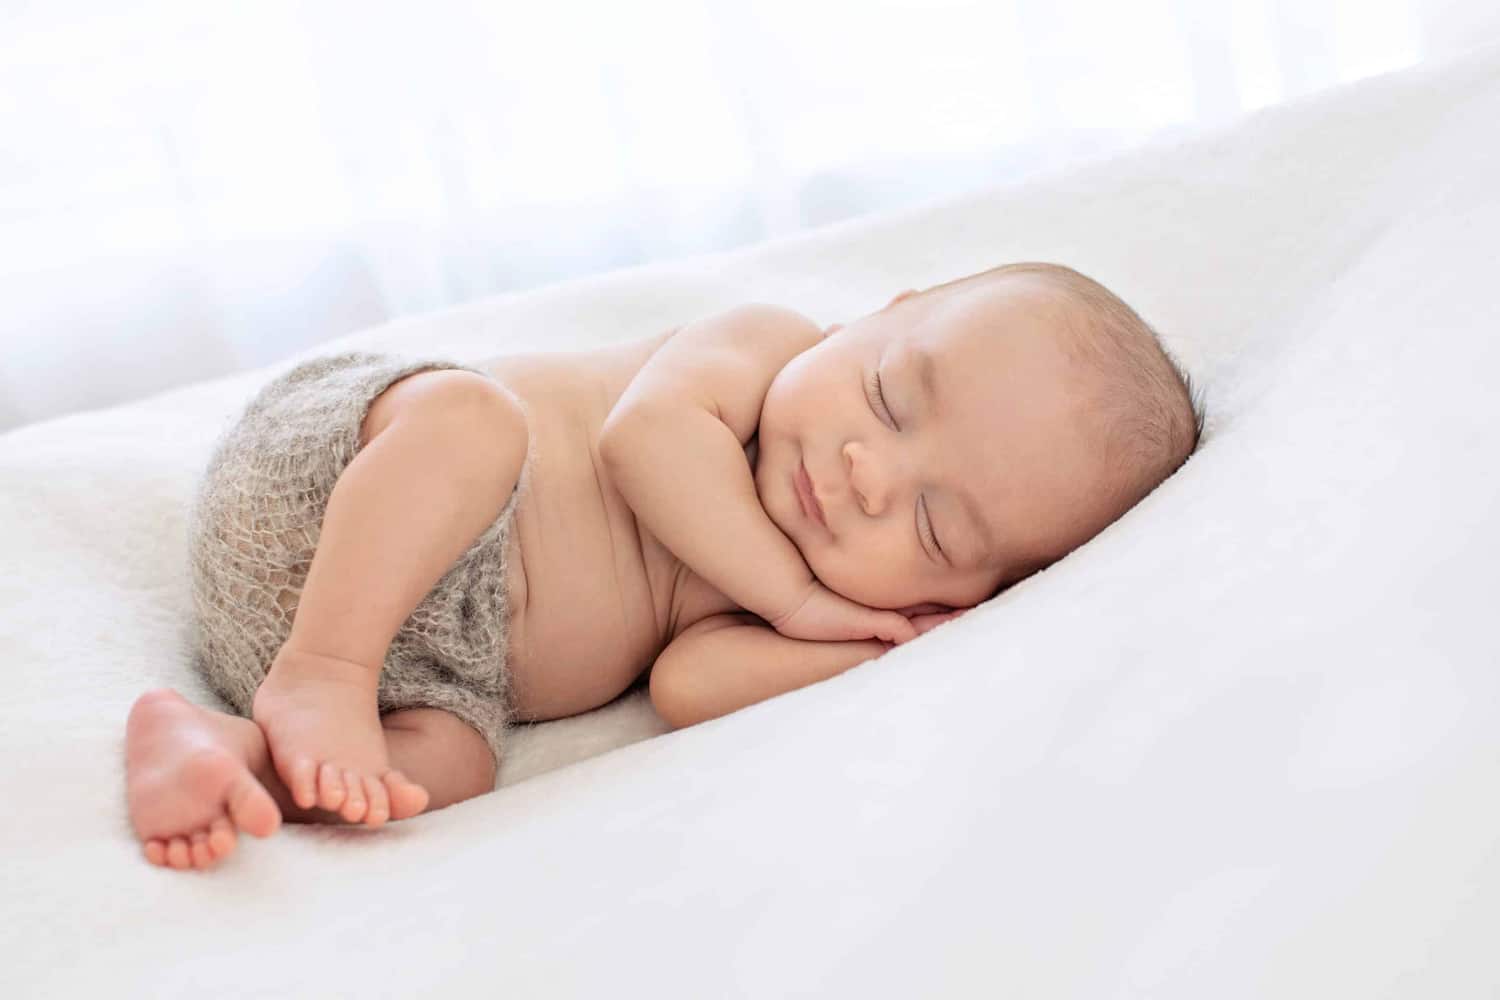 A photo of a newborn baby in gray shorts.